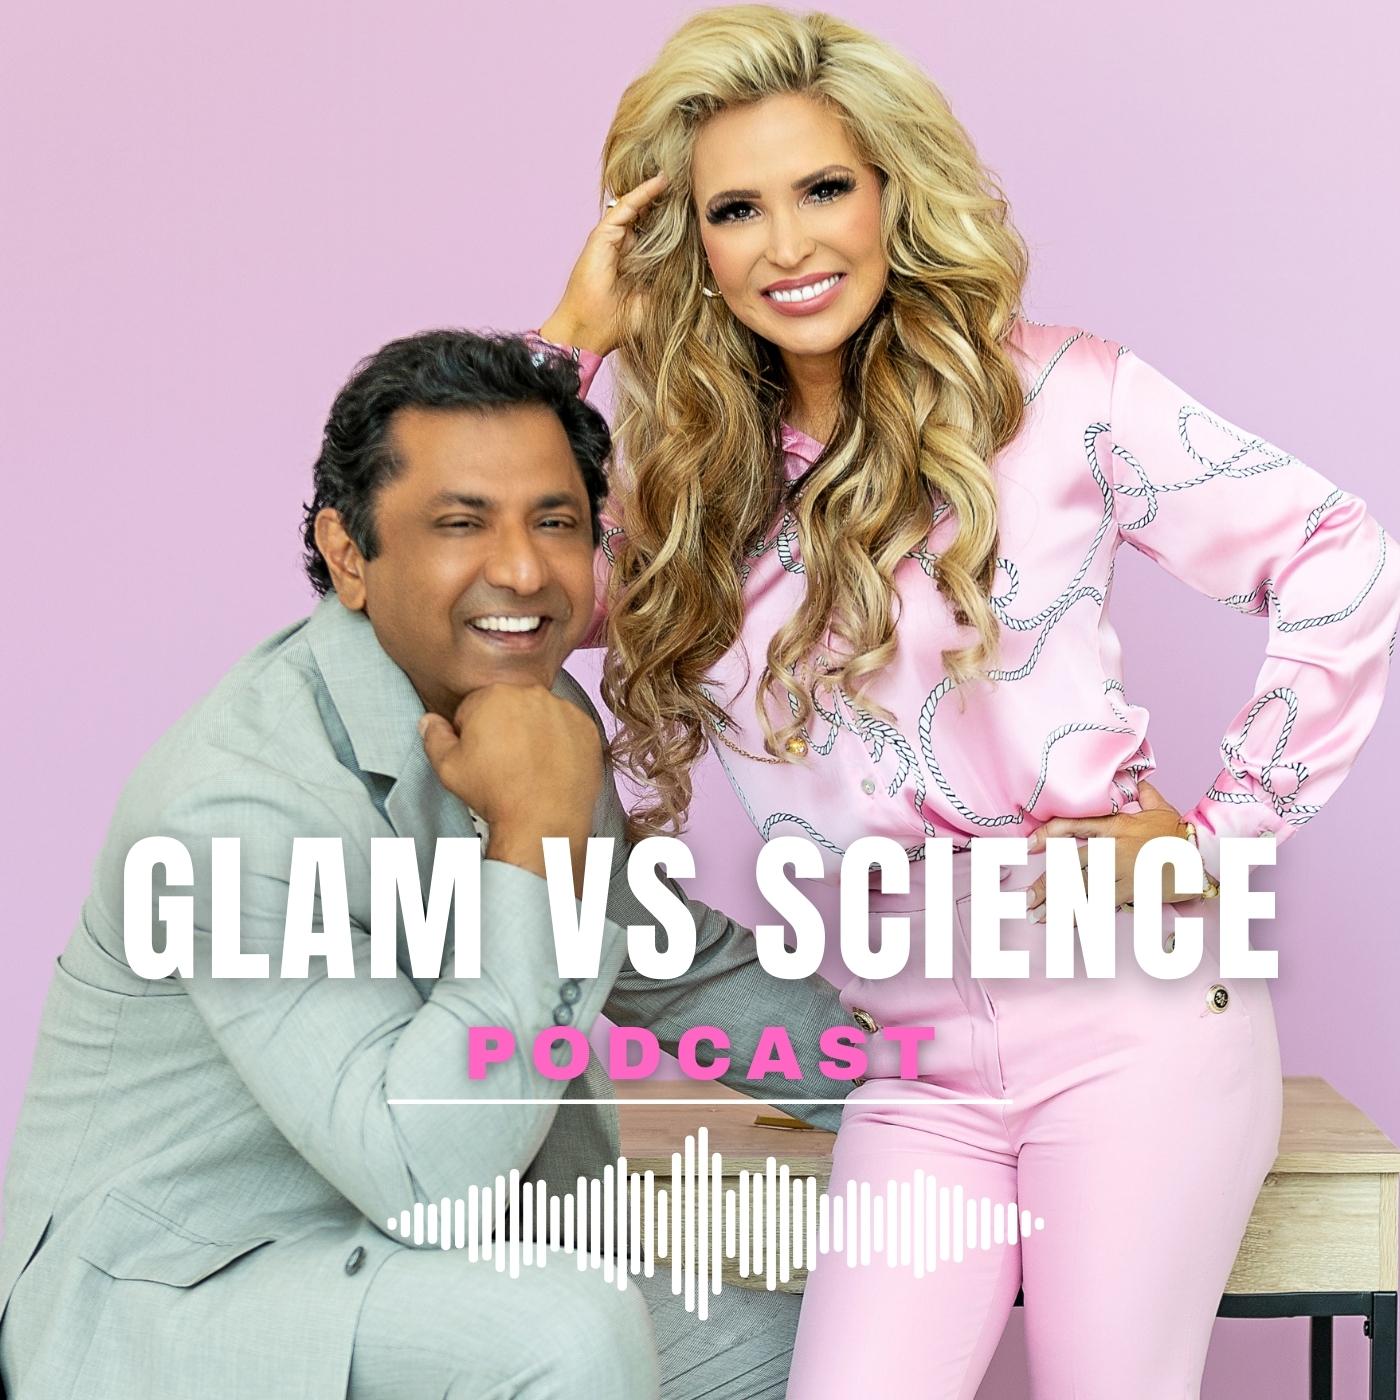 Glam vs Science Podcast Show Card